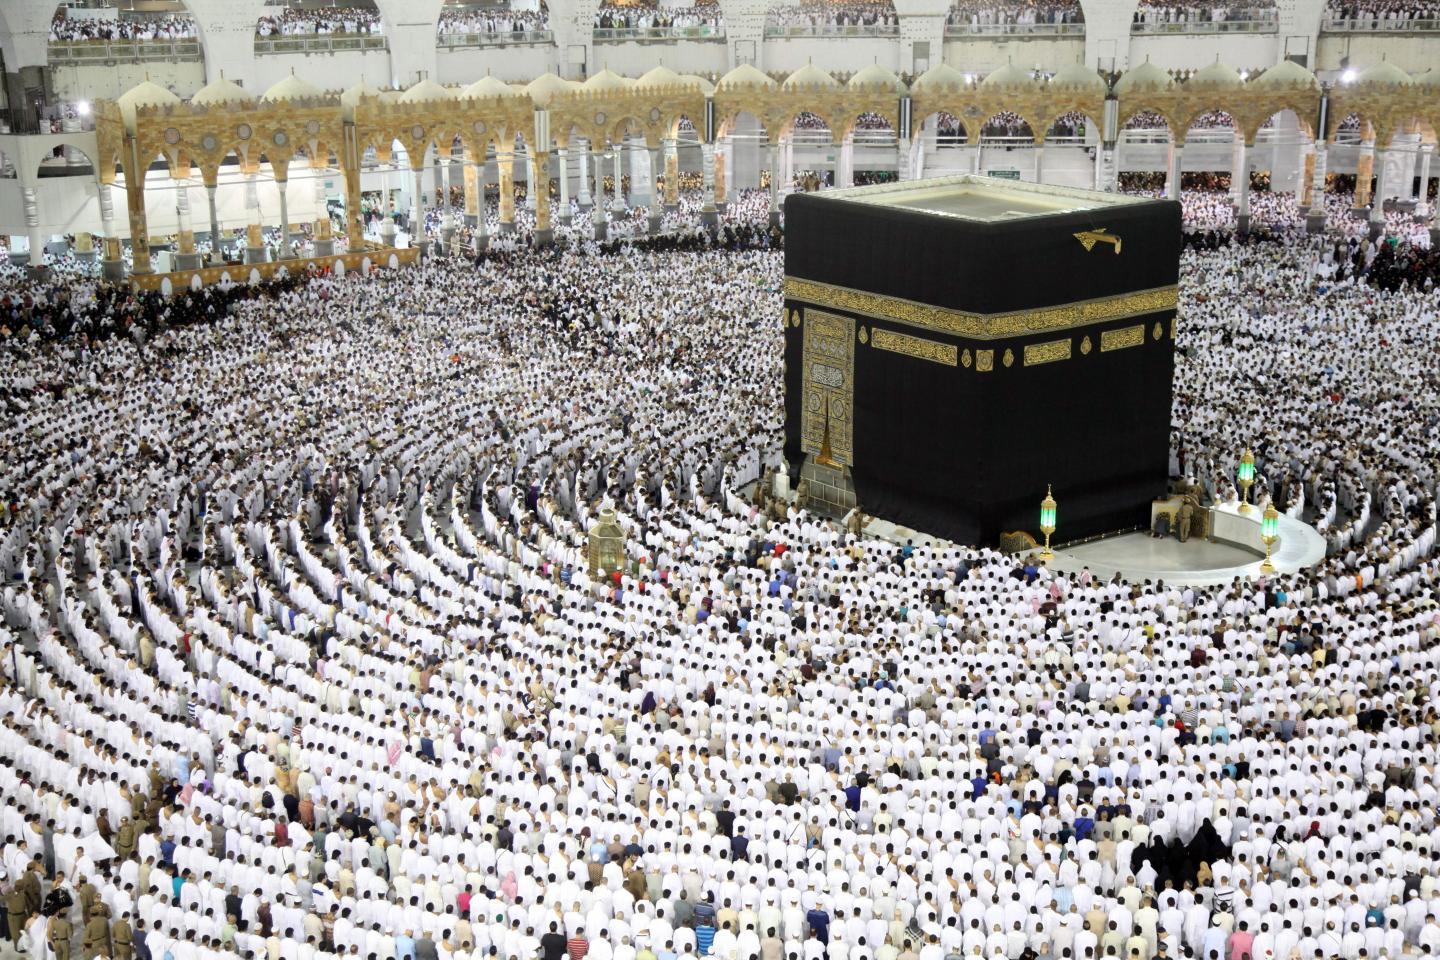 /assets/contentimages/Kaaba.jpg